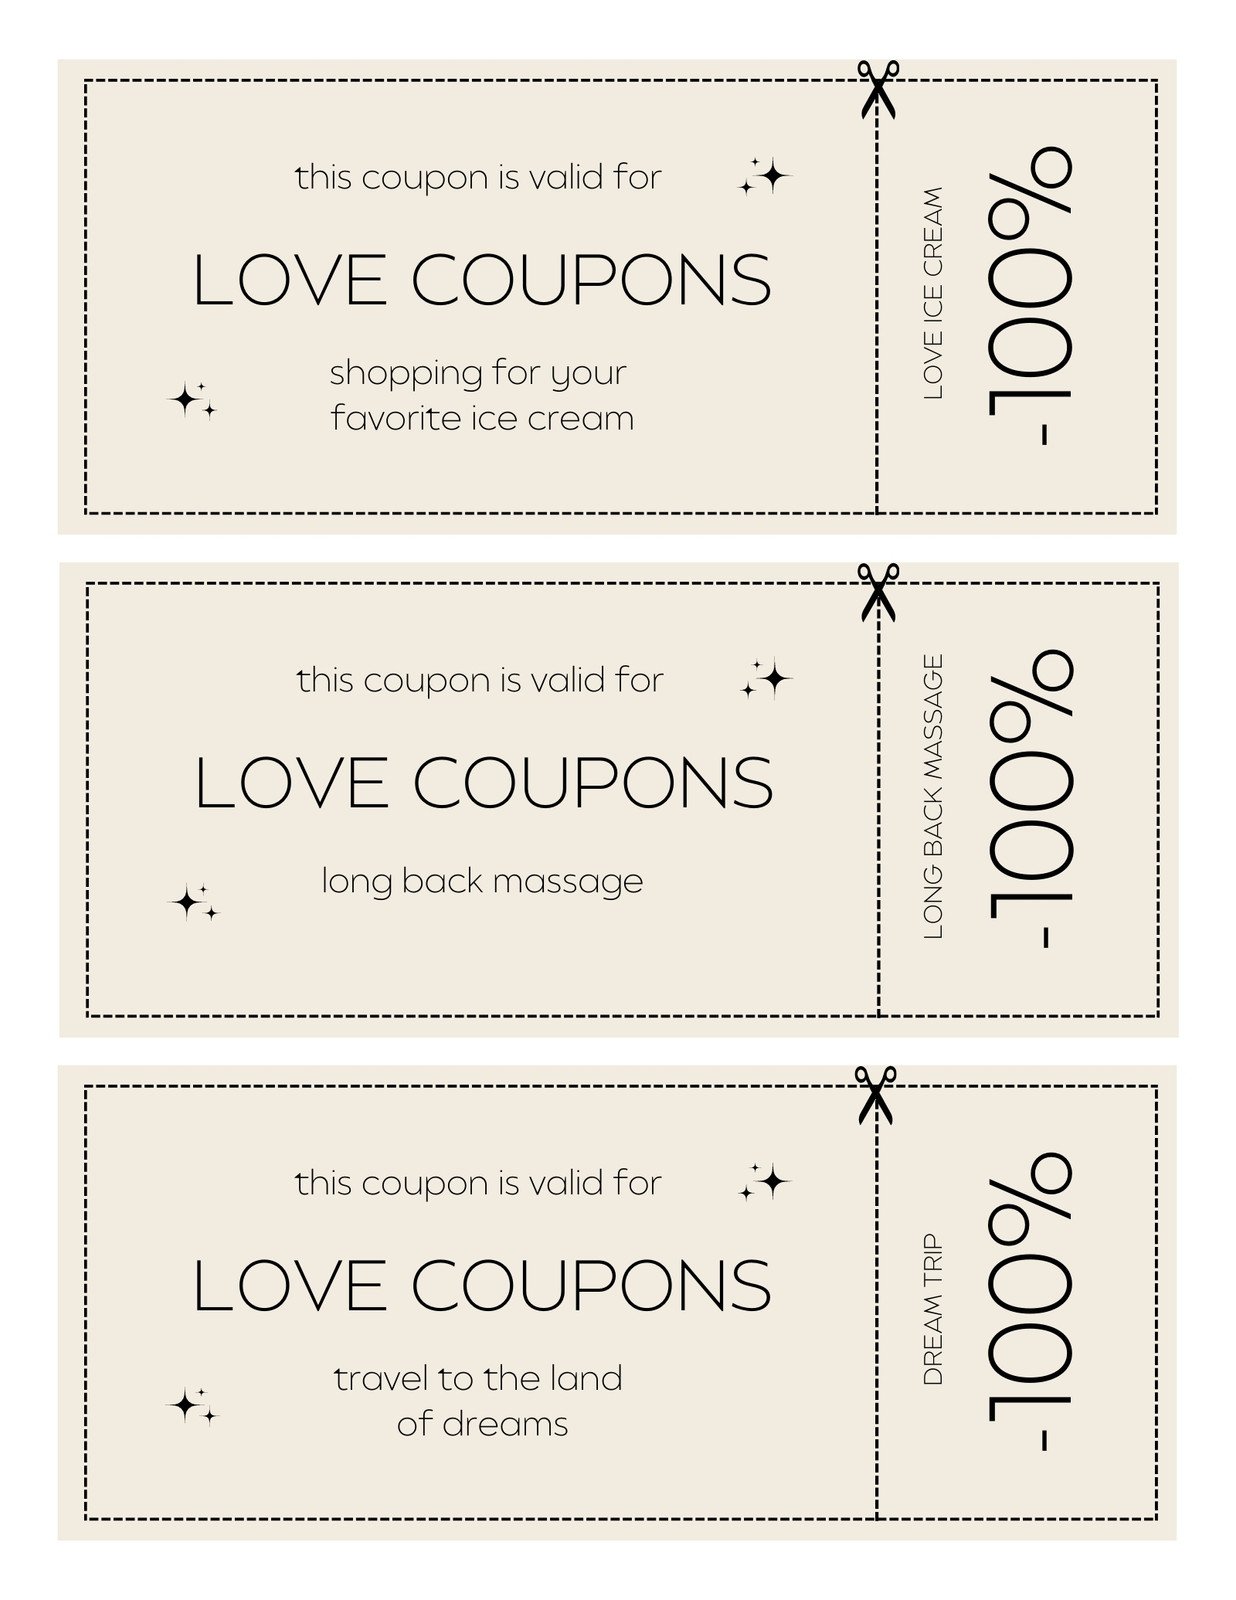 Free sample coupons online